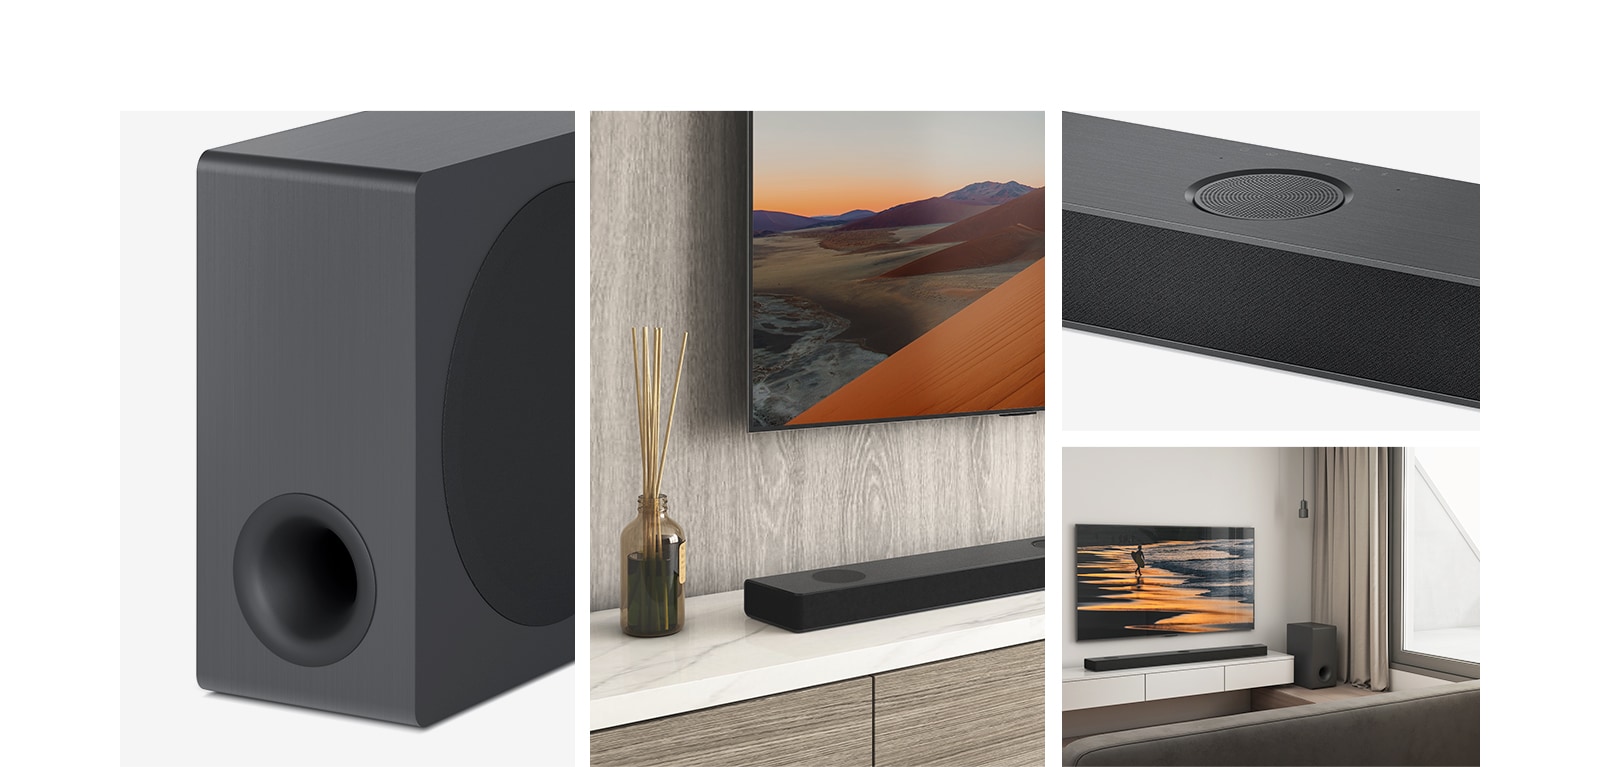 Collage. From left, an image of sub-woofer, Close up of LG TV, showing the mountain on the TV screen, and LG Sound Bar below. On the right, Clockwise from top-bottom: close-up of center up-firing channel. LG Sound Bar, sub-woofer, and LG TV which displays a beach at sunset is placed in the living room.